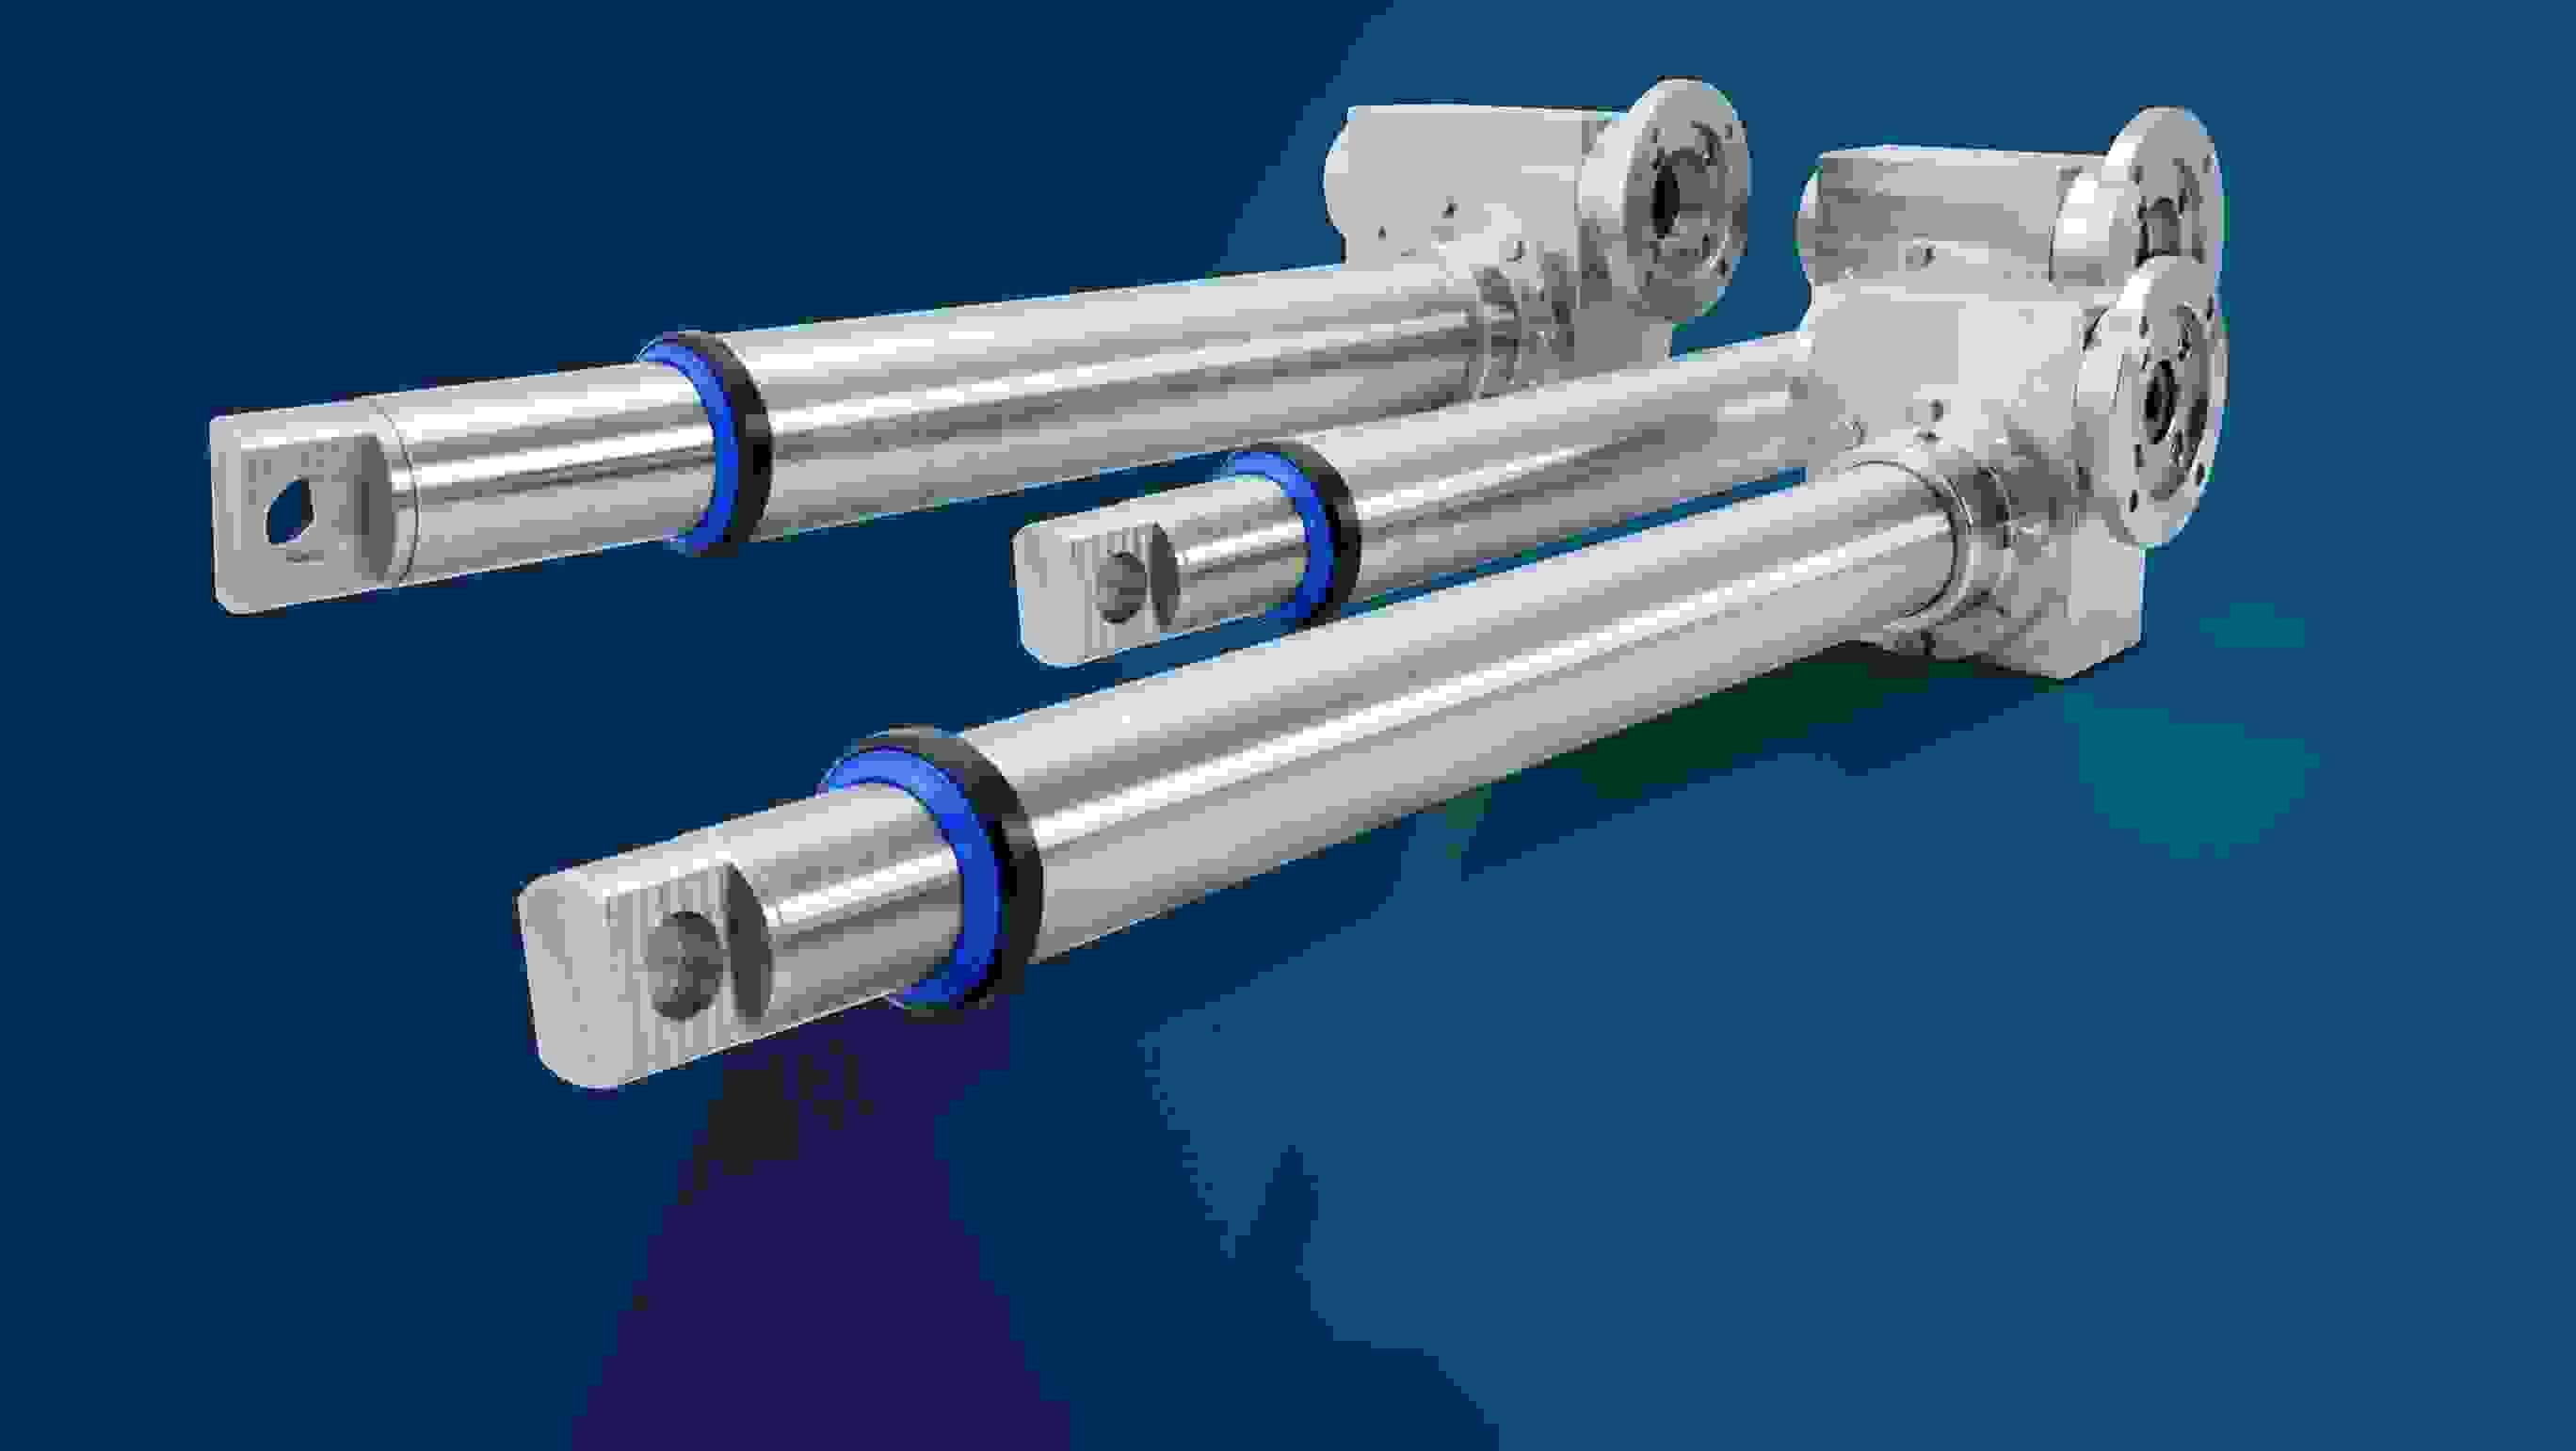 Two stainless steel actuators on blue background 